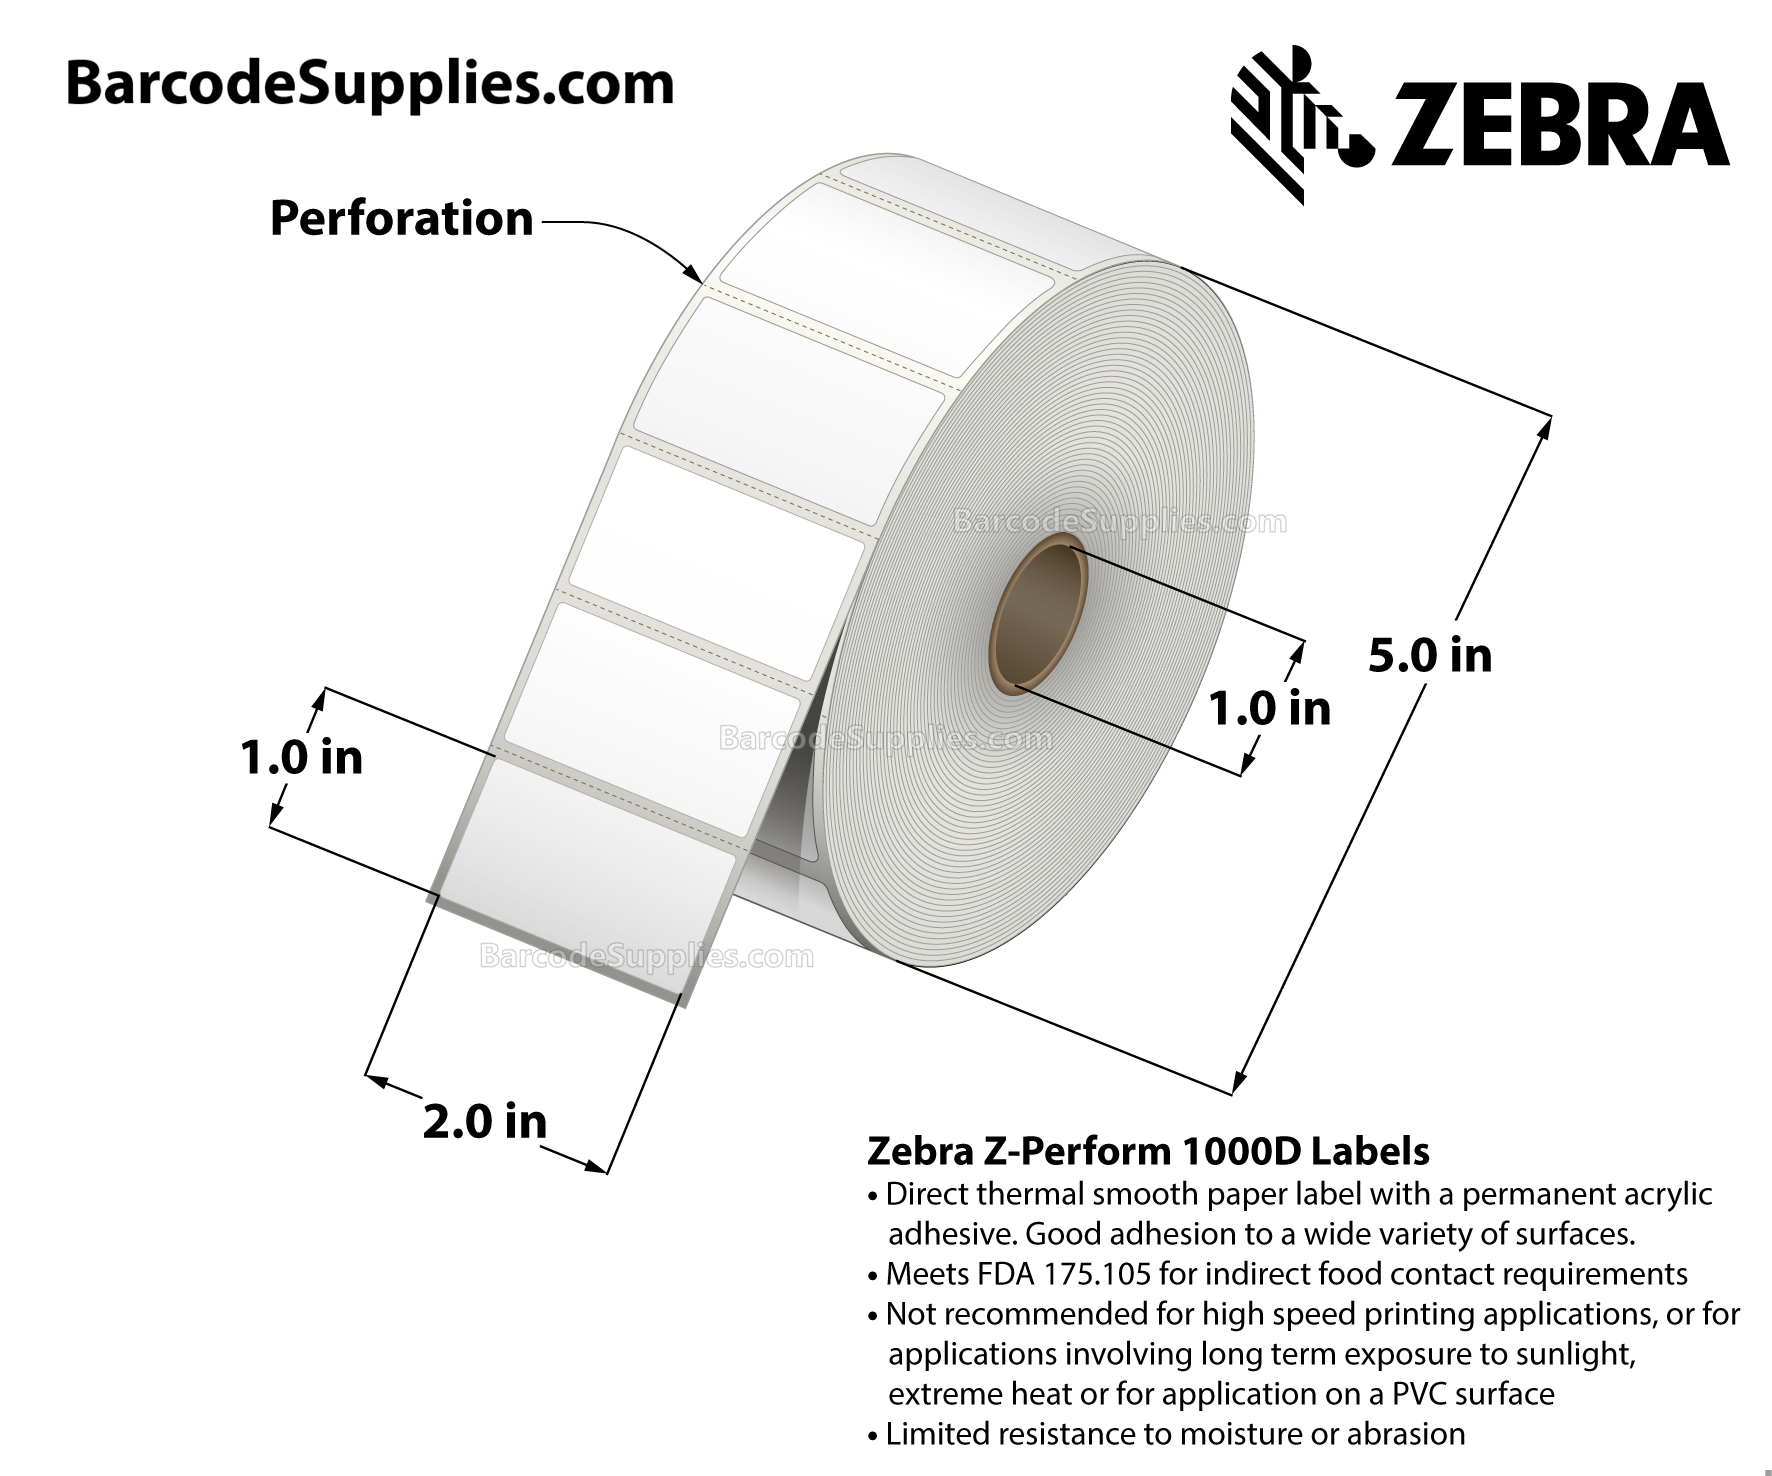 2 x 1 Direct Thermal White Z-Perform 1000D Labels With Permanent Adhesive - Perforated - 2340 Labels Per Roll - Carton Of 6 Rolls - 14040 Labels Total - MPN: 10026381